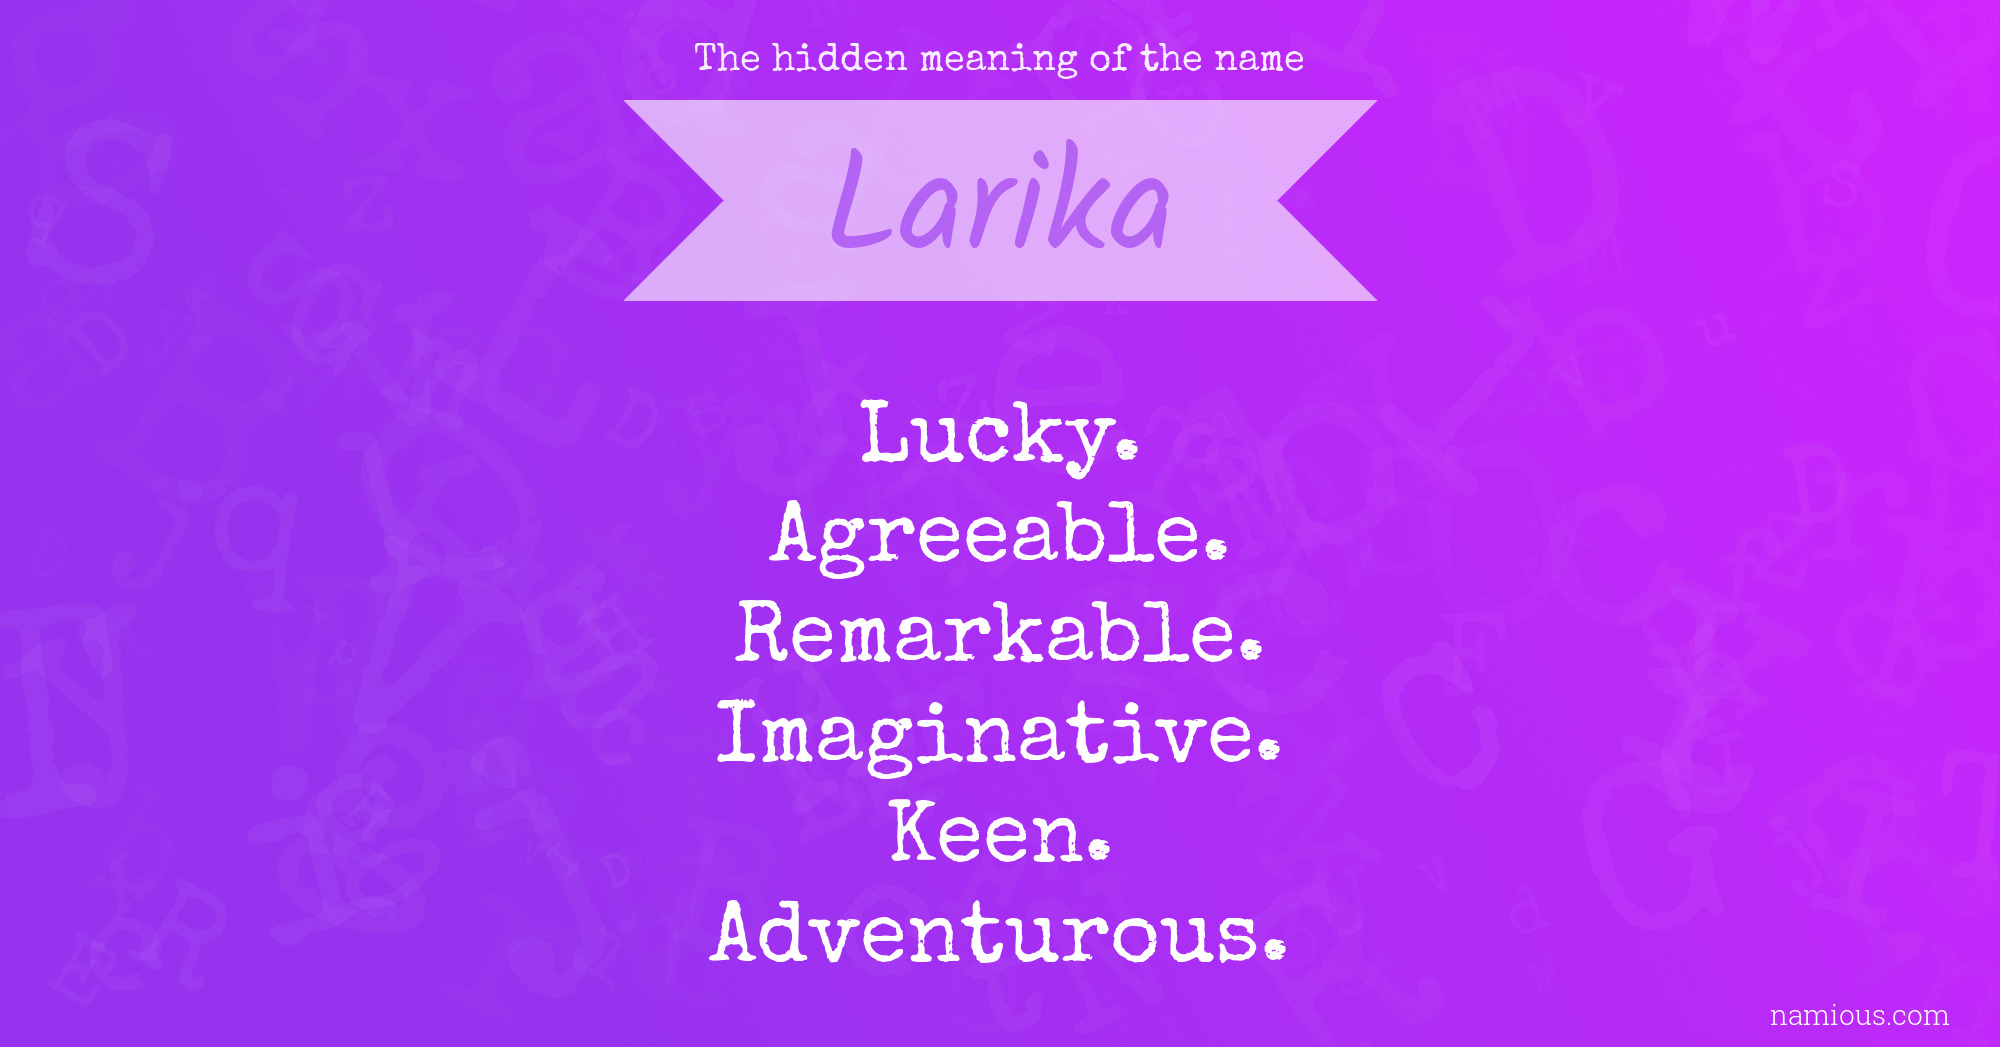 The hidden meaning of the name Larika